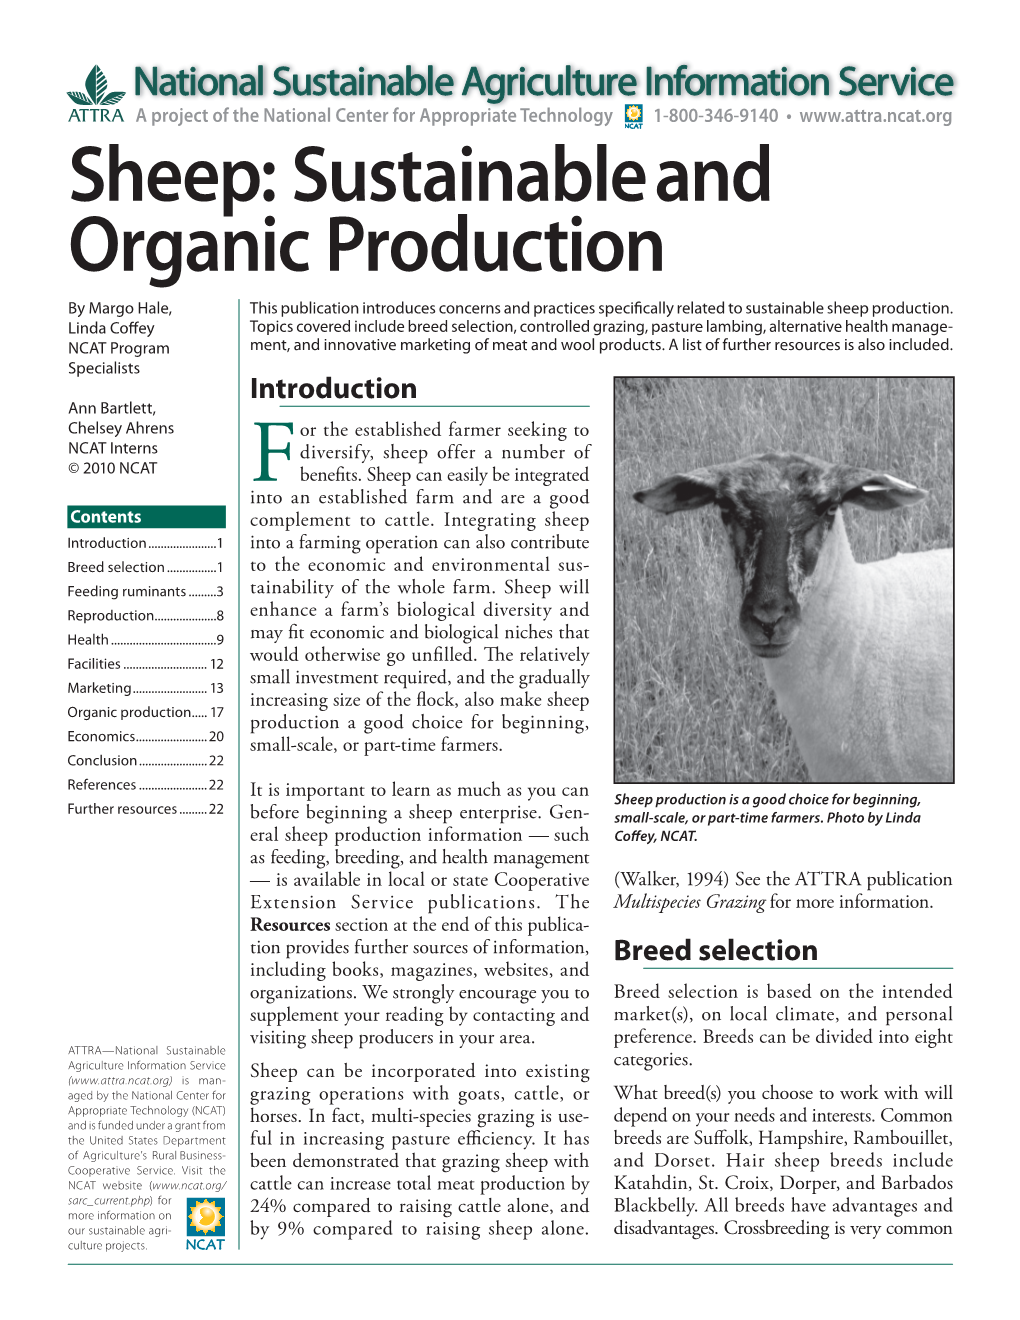 Sheep: Sustainable and Organic Production by Margo Hale, This Publication Introduces Concerns and Practices Specifi Cally Related to Sustainable Sheep Production